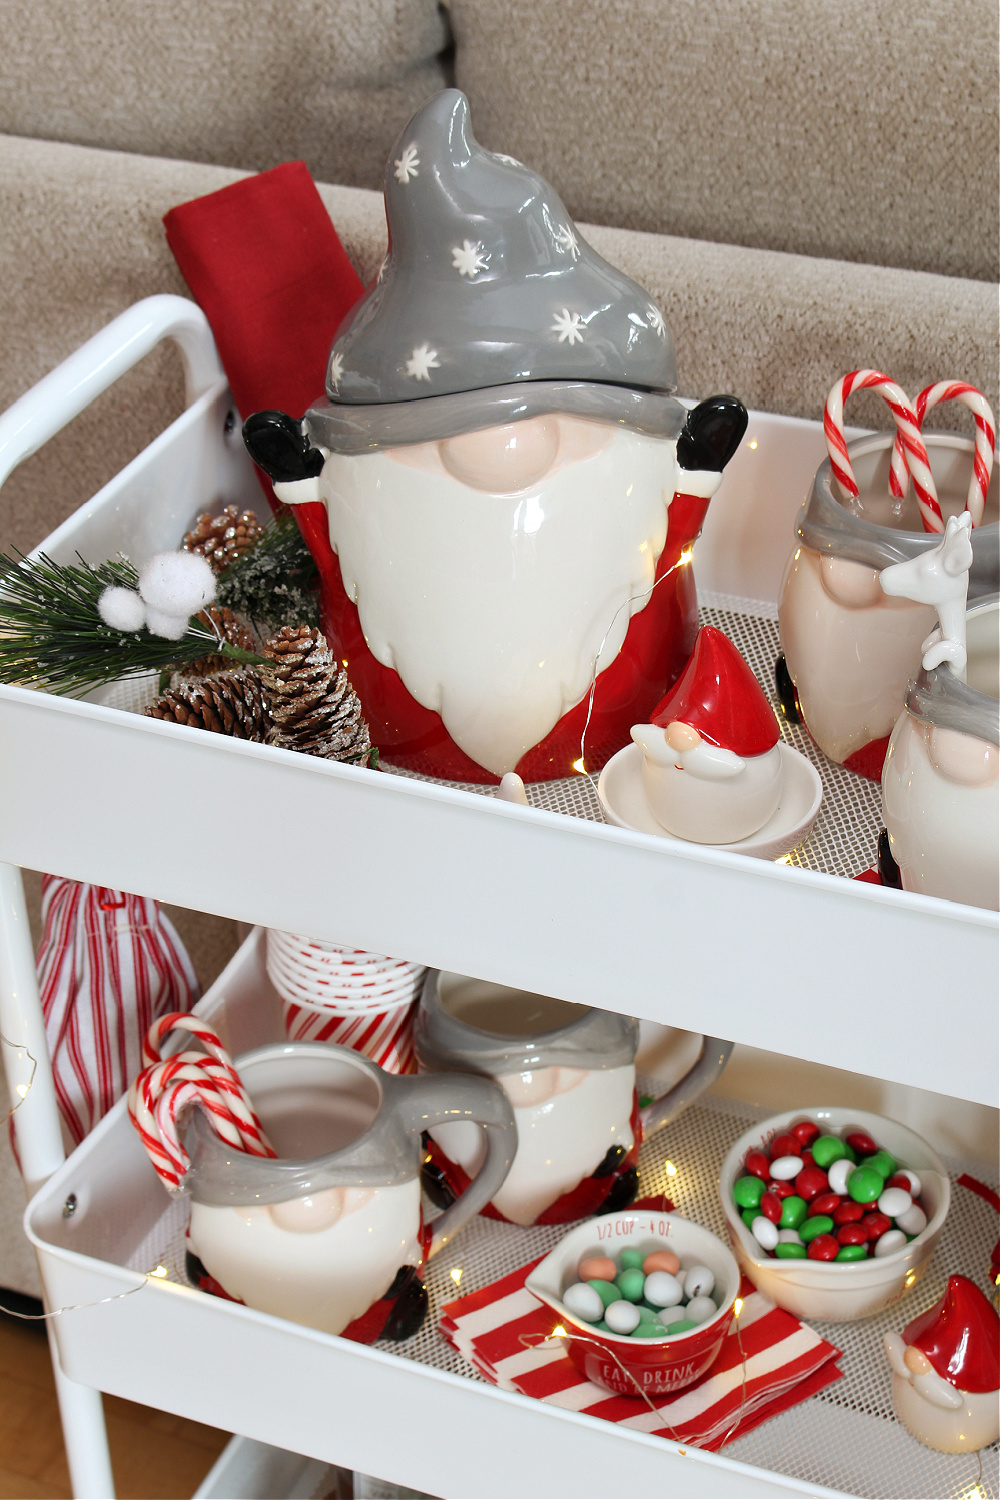 Cute Christmas hot chocolate bar cart with gnome cookie jar and mugs.